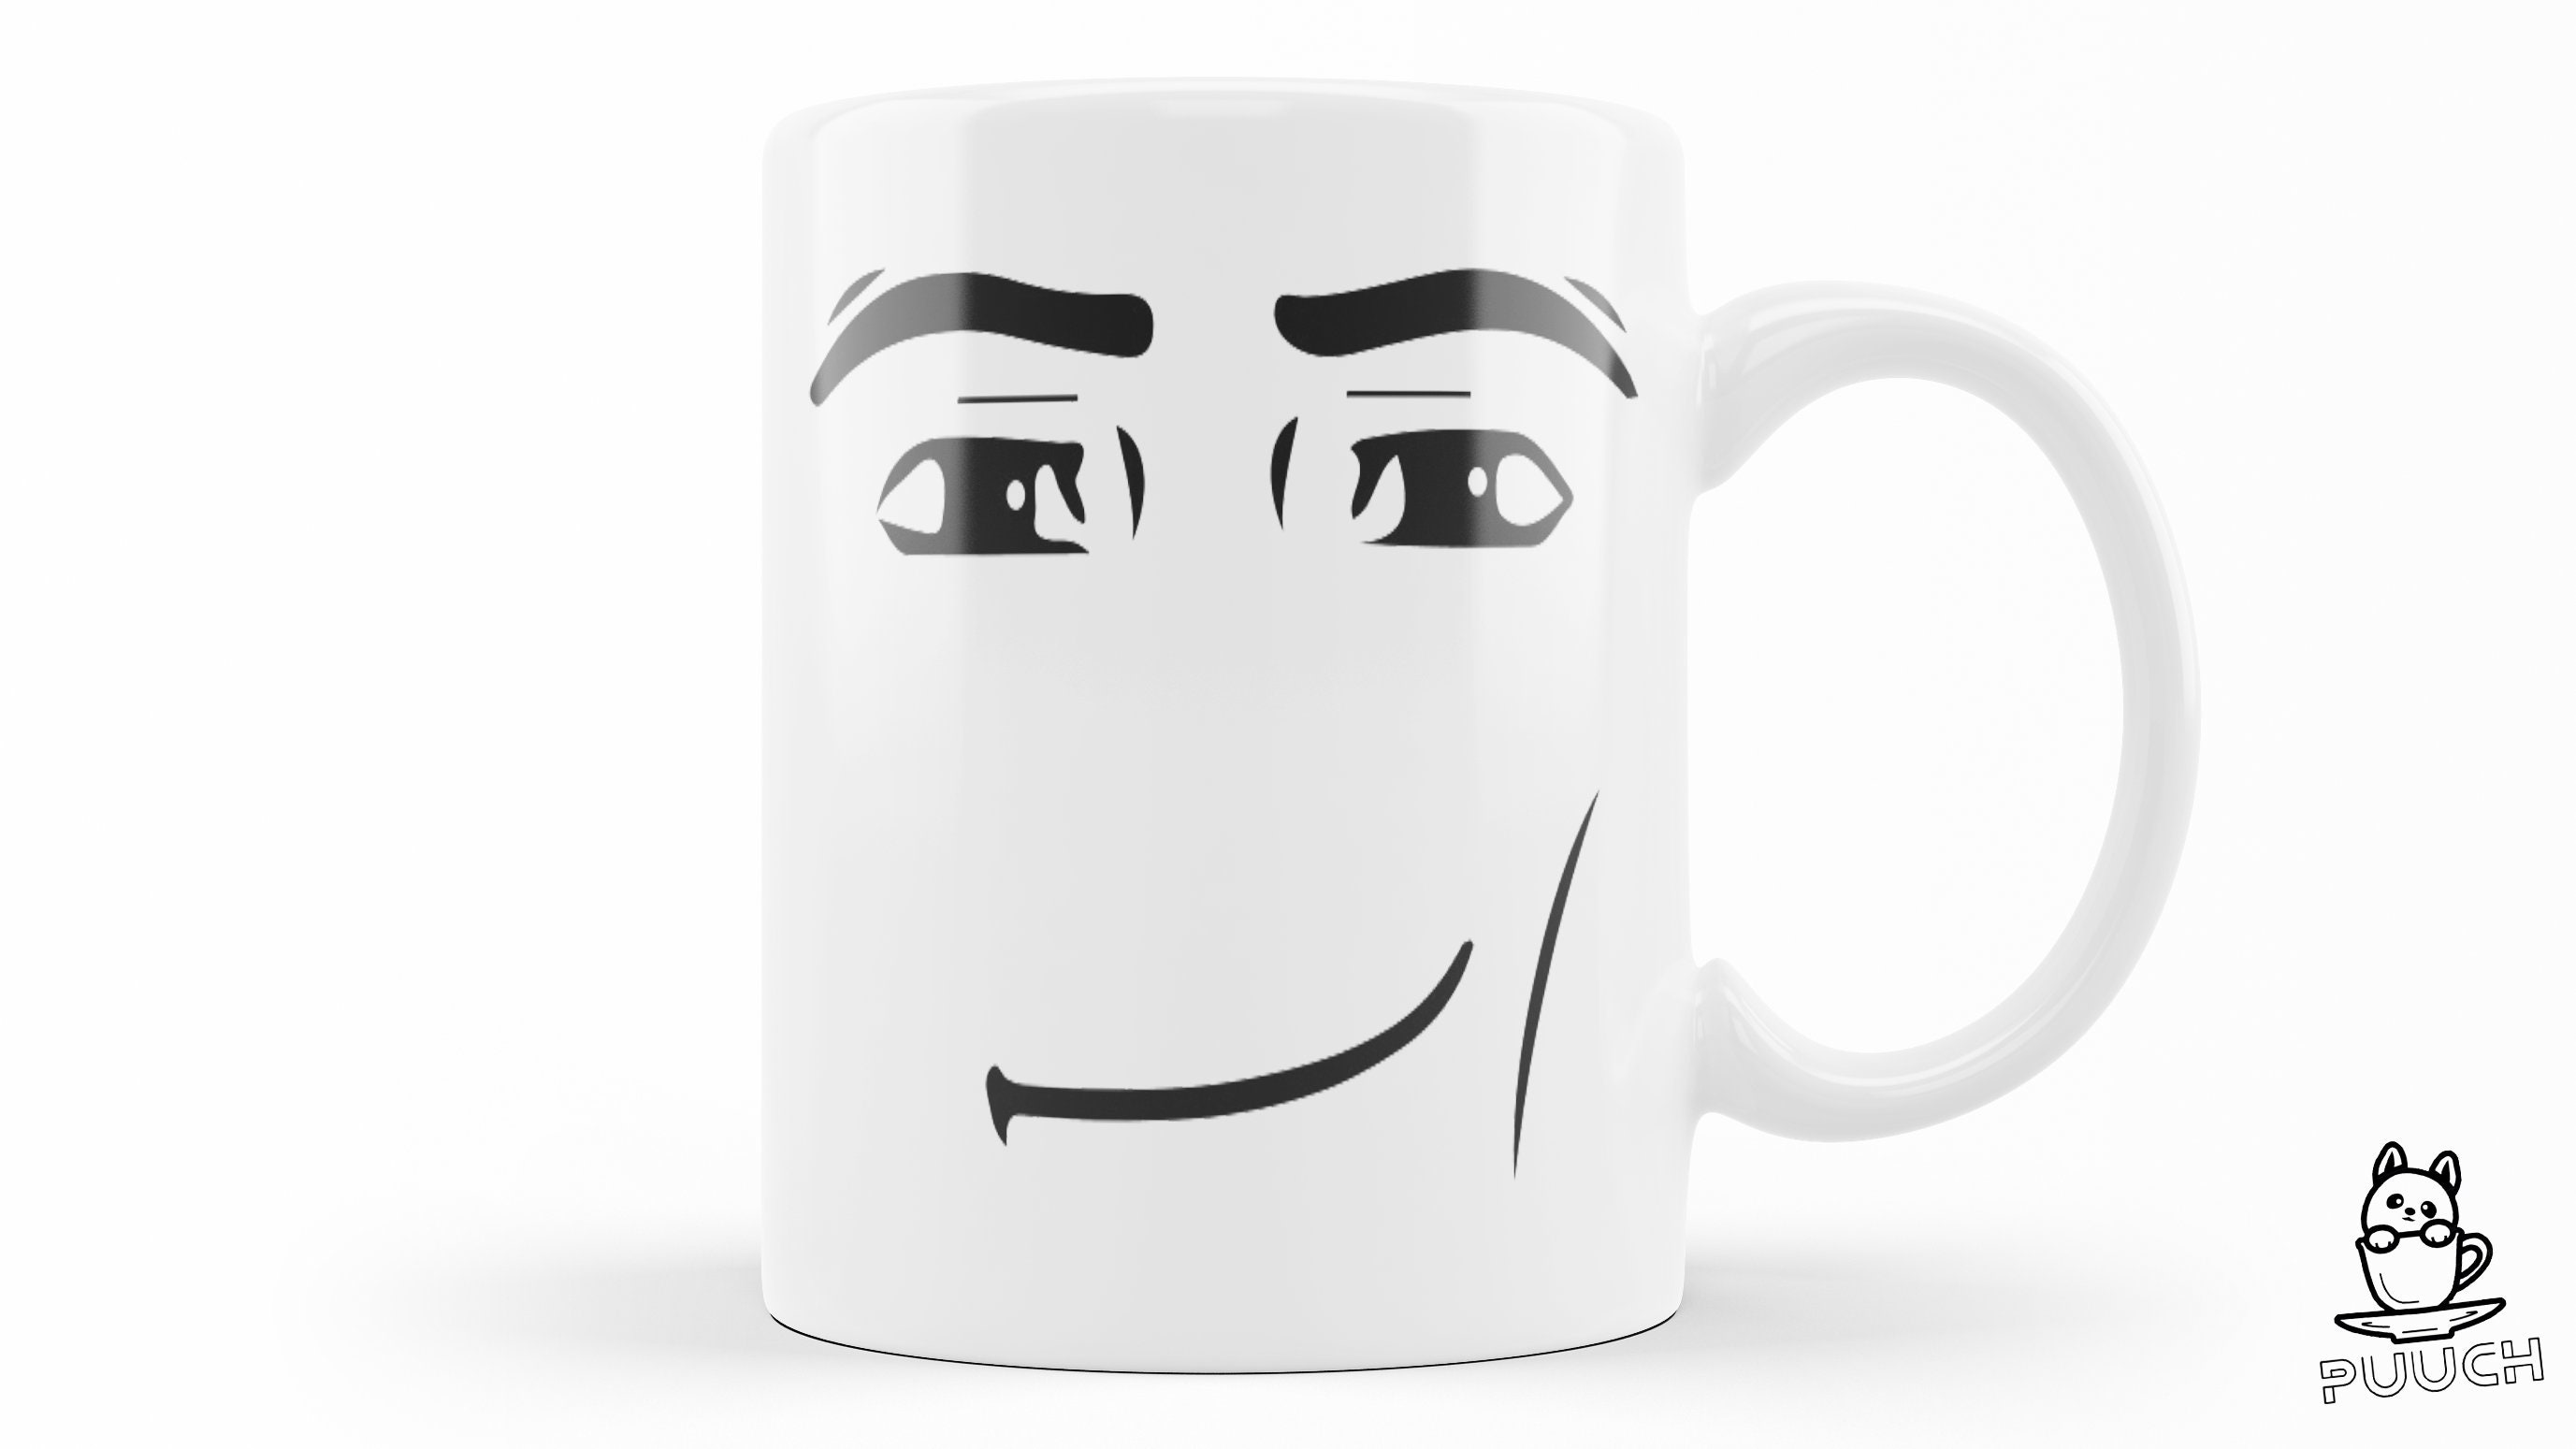 I brought the man face mug to Roblox's HQ #roblox 